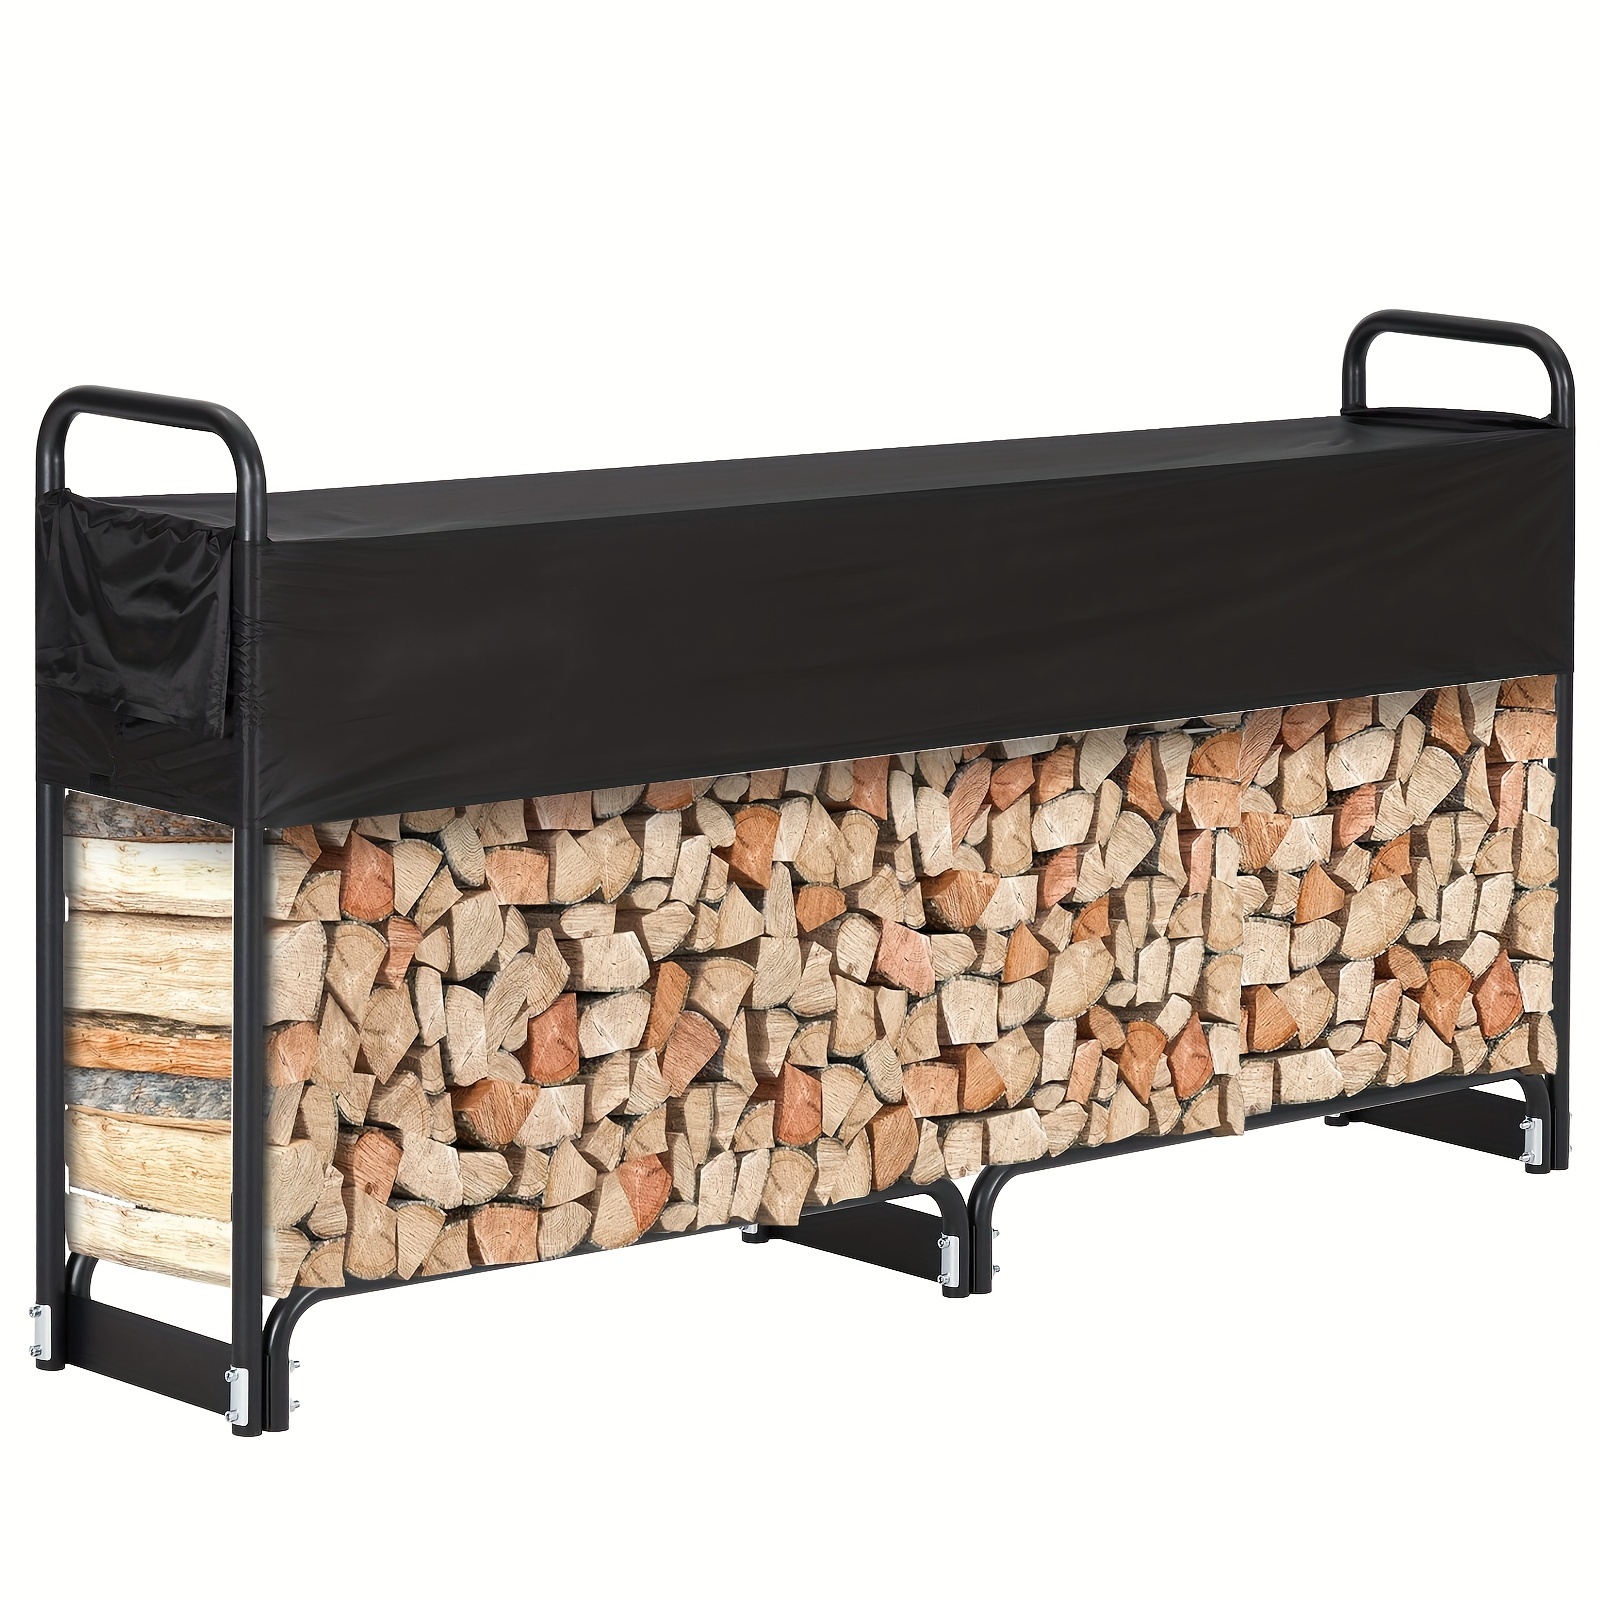 

1pc 8ft Outdoor Firewood Rack, Fireplace Fire Pit Wood Pile Storage Stand, Timber Stand, Heavy Duty Square Sturdy Stand, Can Withstand 440lb With Waterproof Cover